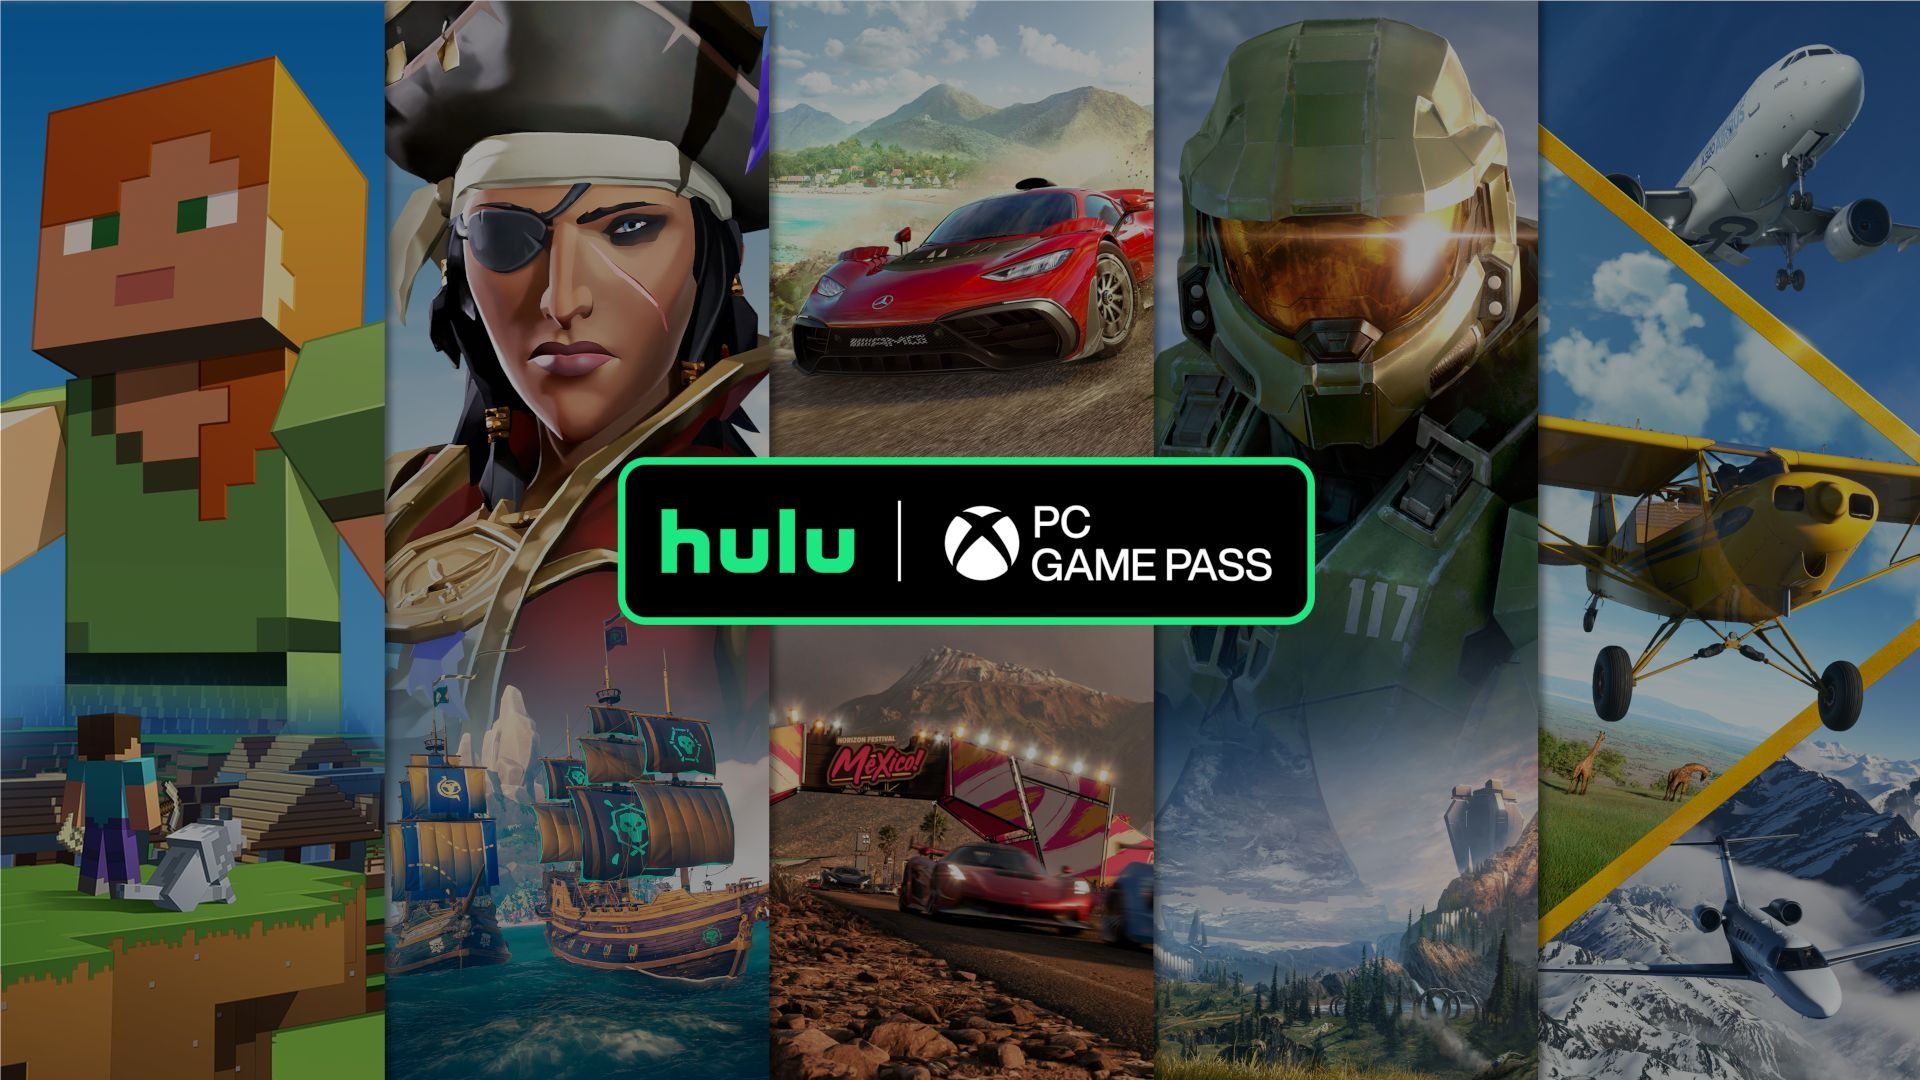 With a recent promotion, Hulu Game Pass PC offers 3 months of free use on both Xbox and EA game streaming subscriptions.